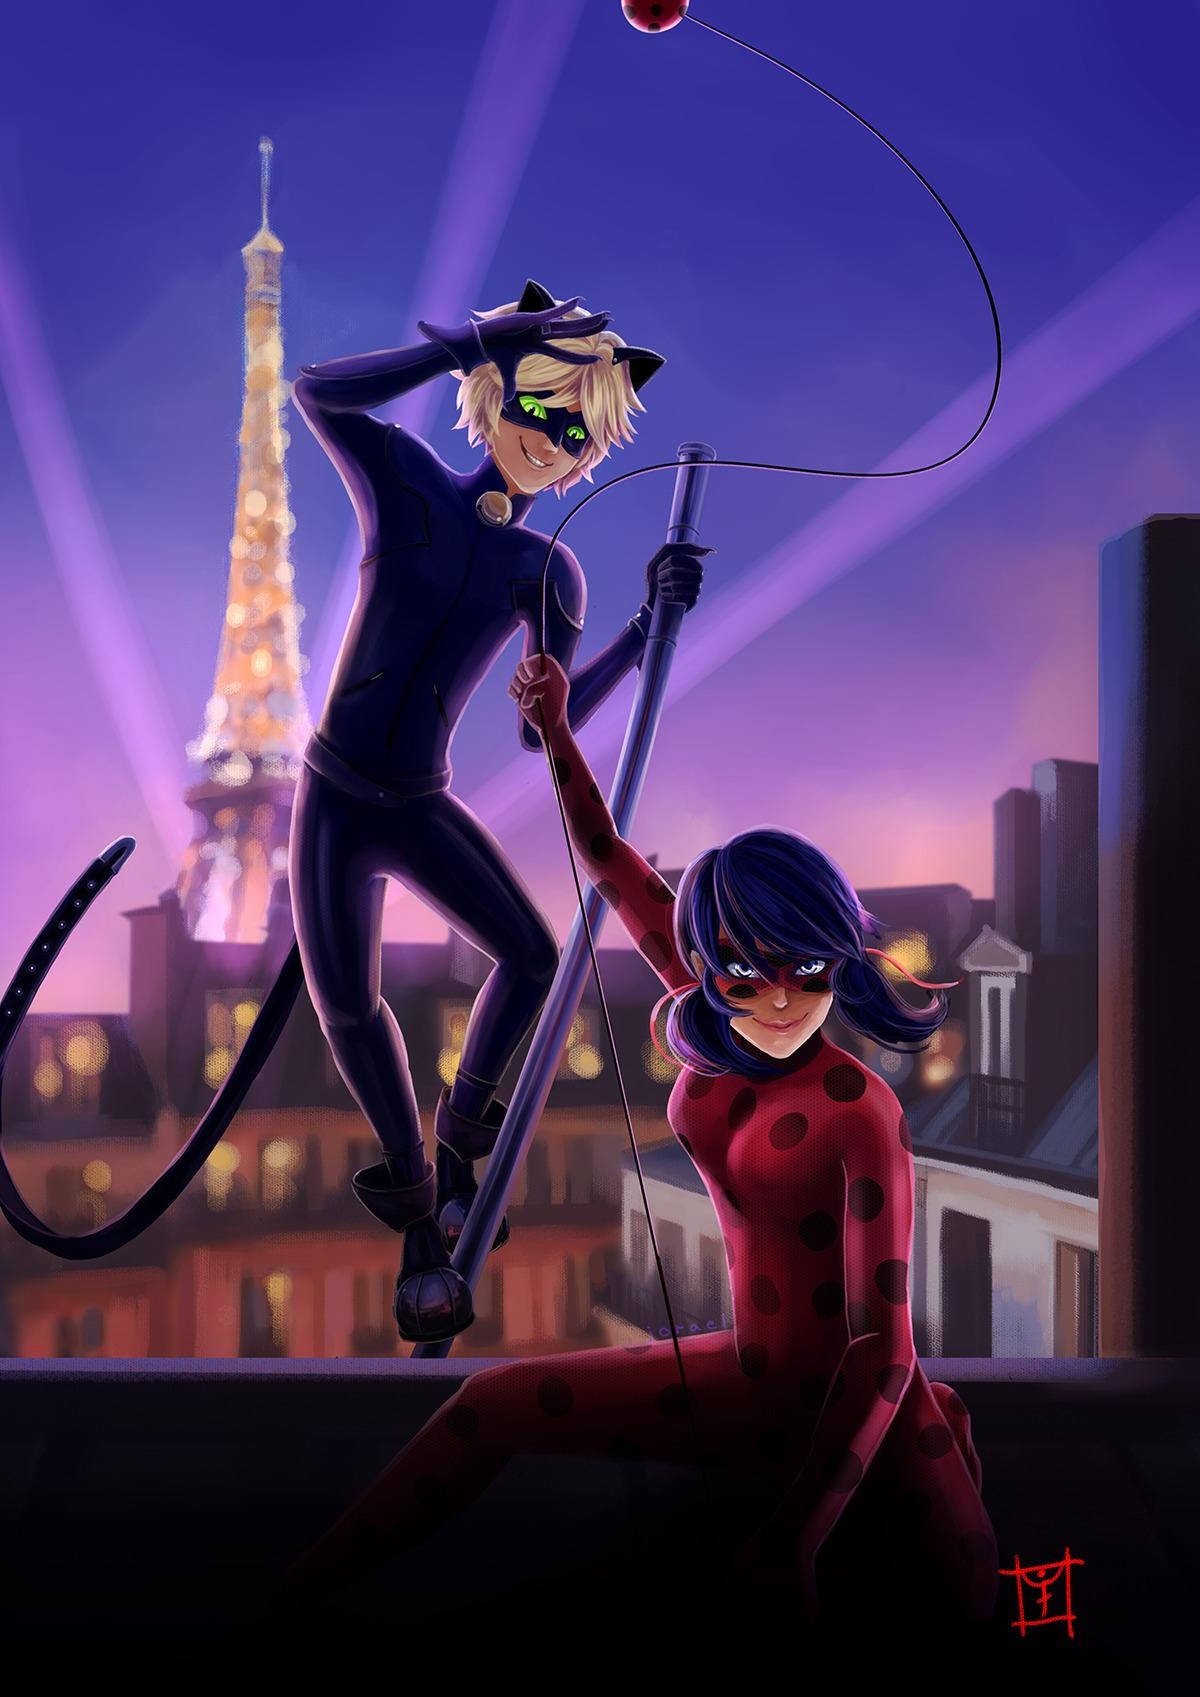 Ladybug And Cat Noir Action Poses In Paris Wallpaper